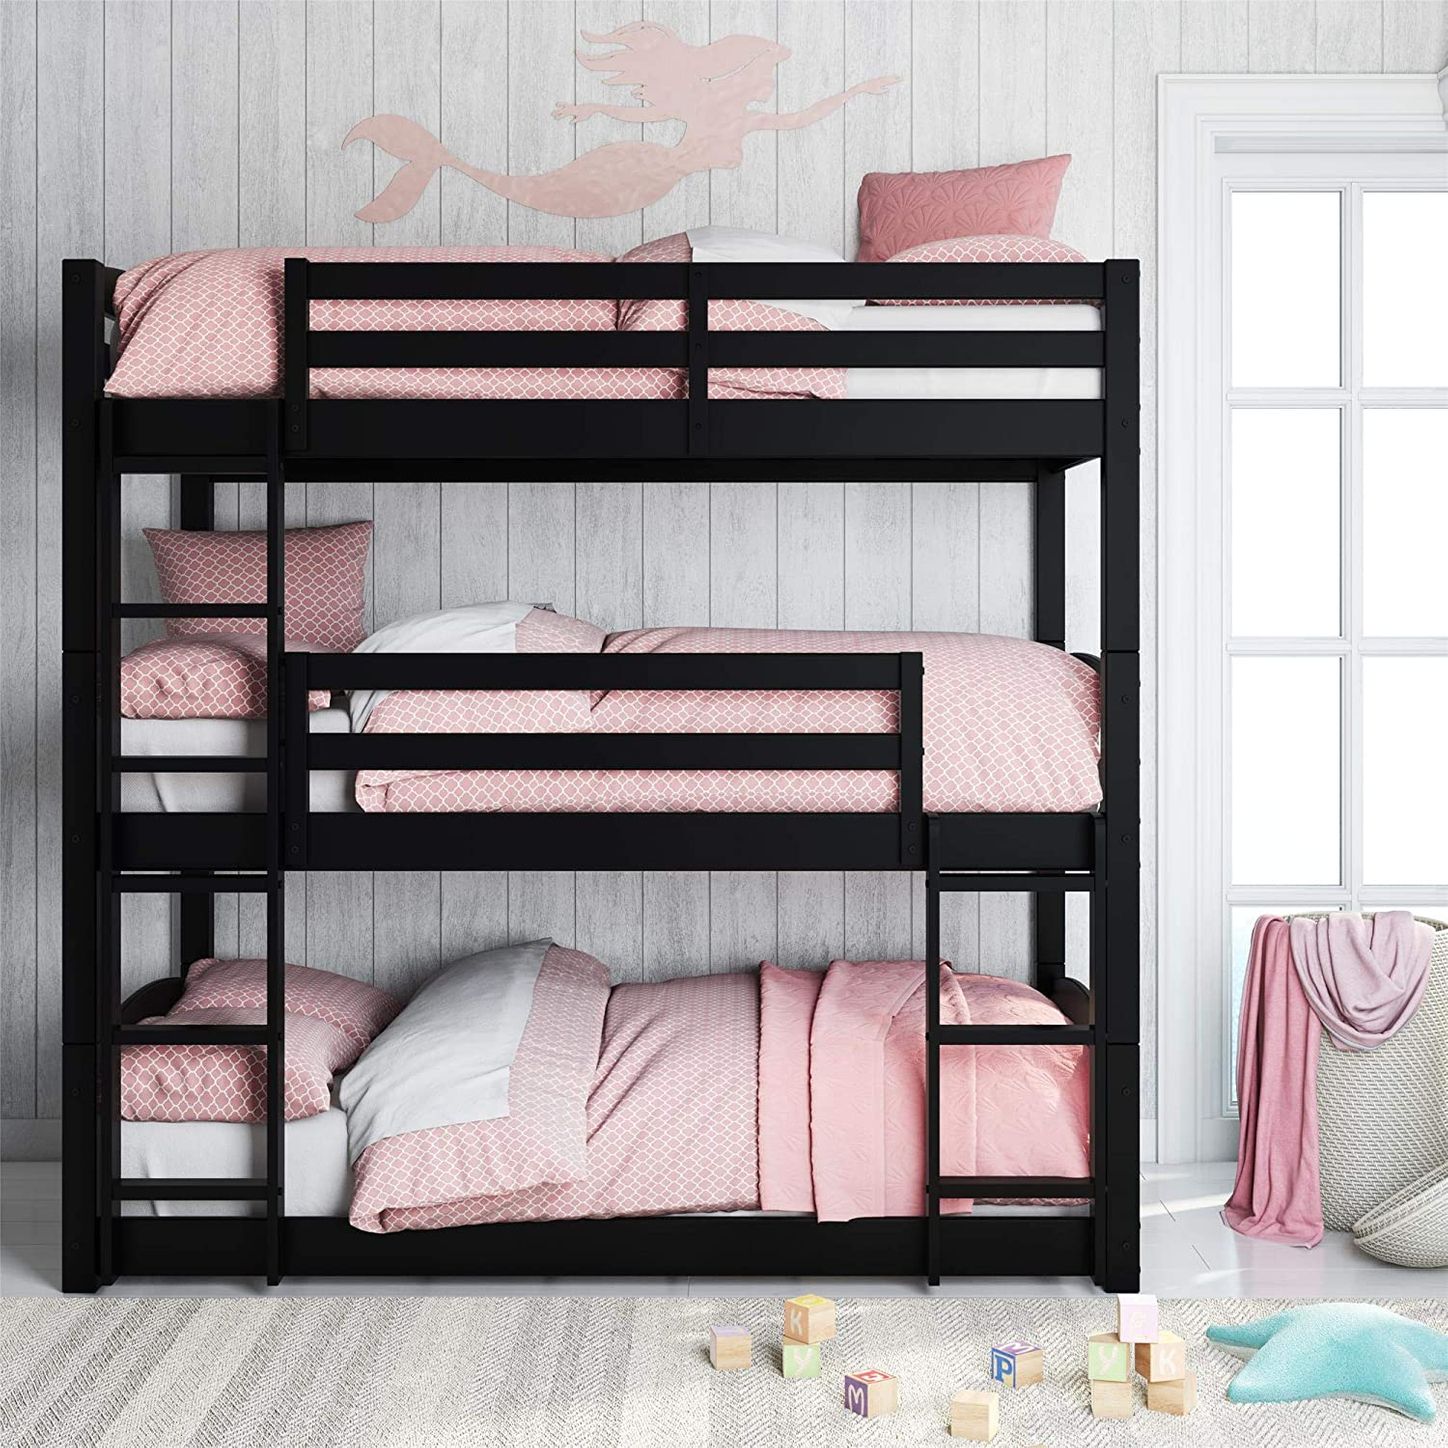 8 Best Bunk Beds 2020 The Strategist, Bunk Beds With Bottom Safety Rail